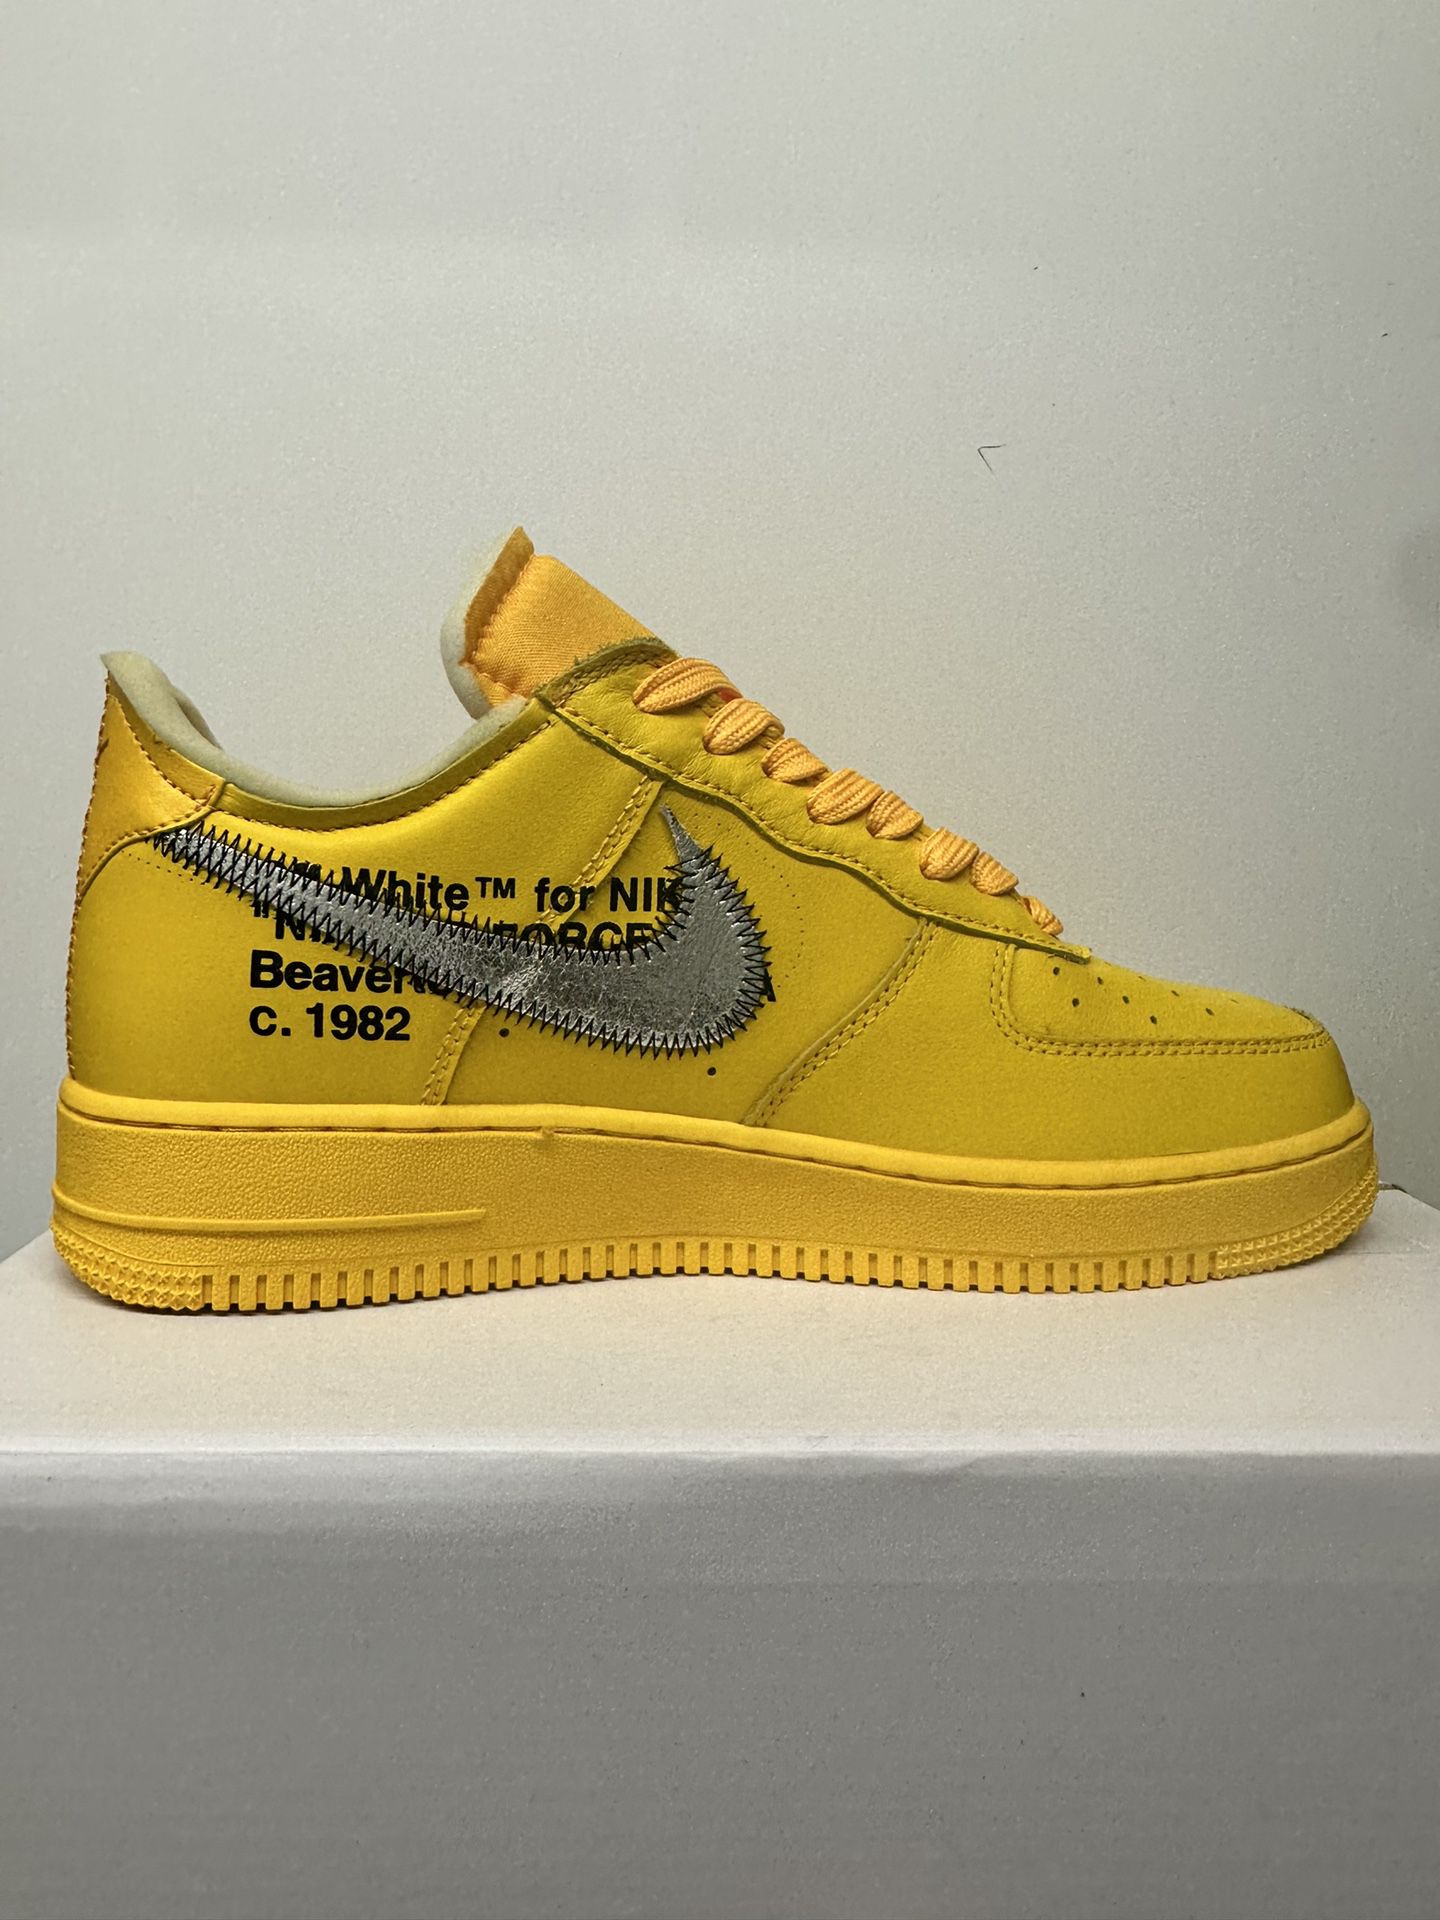 OFF WHITE NIKE AIR FORCE 1 LOW AF1 UNIVERSITY GOLD YELLOW SILVER BLACK NEW  SALE SNEAKERS SHOES MEN SIZE 9 11 A4 for Sale in Miami, FL - OfferUp